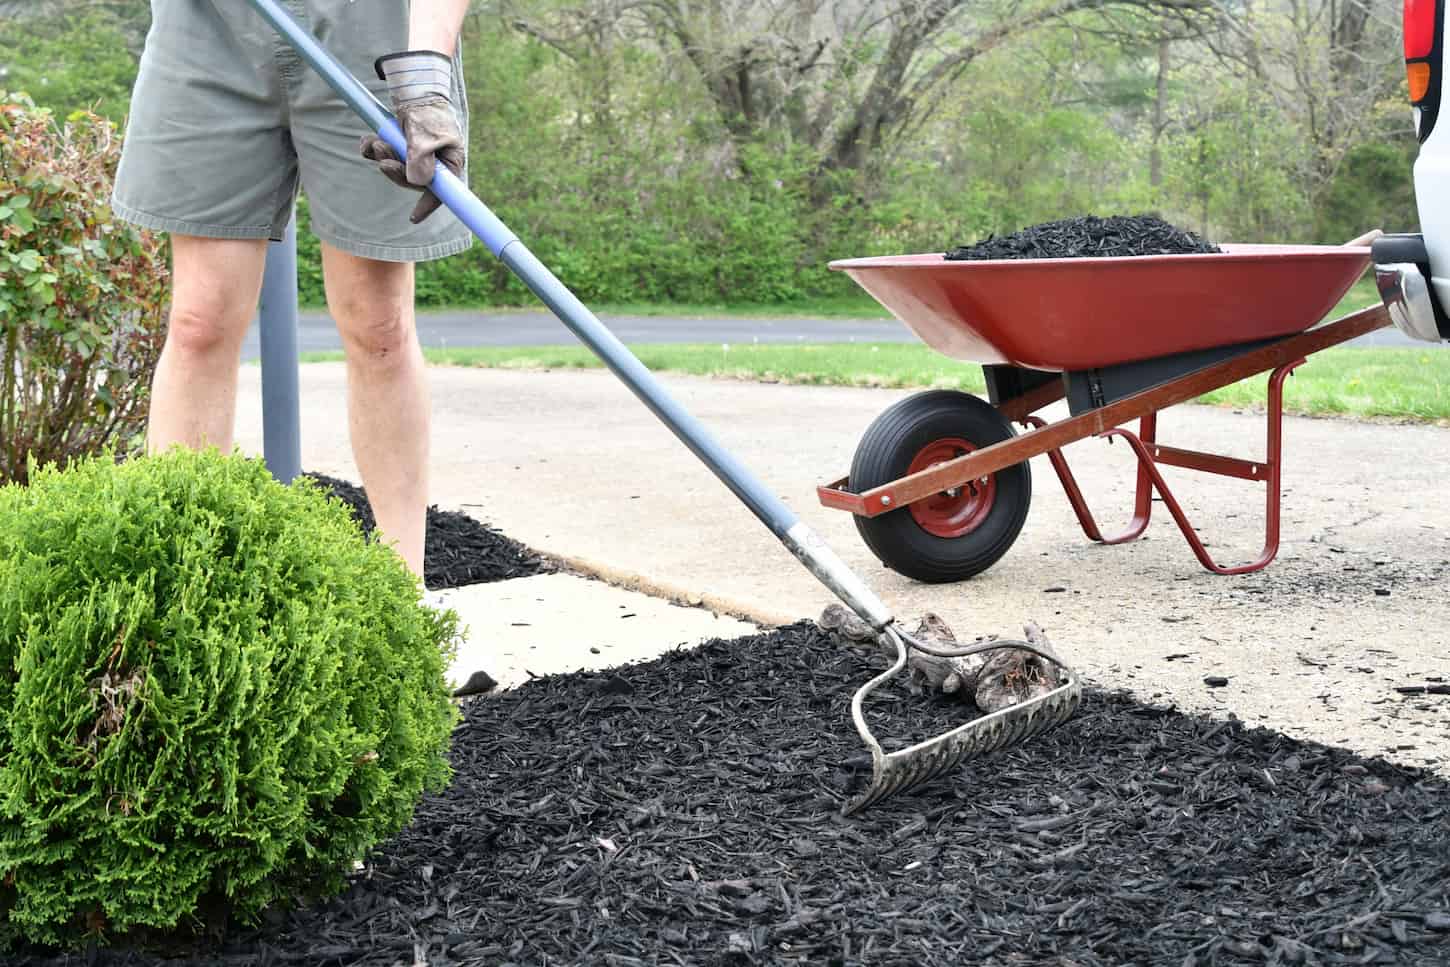 An image of a man doing yard work chores spreading mulch with a rake from a wheelbarrow around landscape bushes.